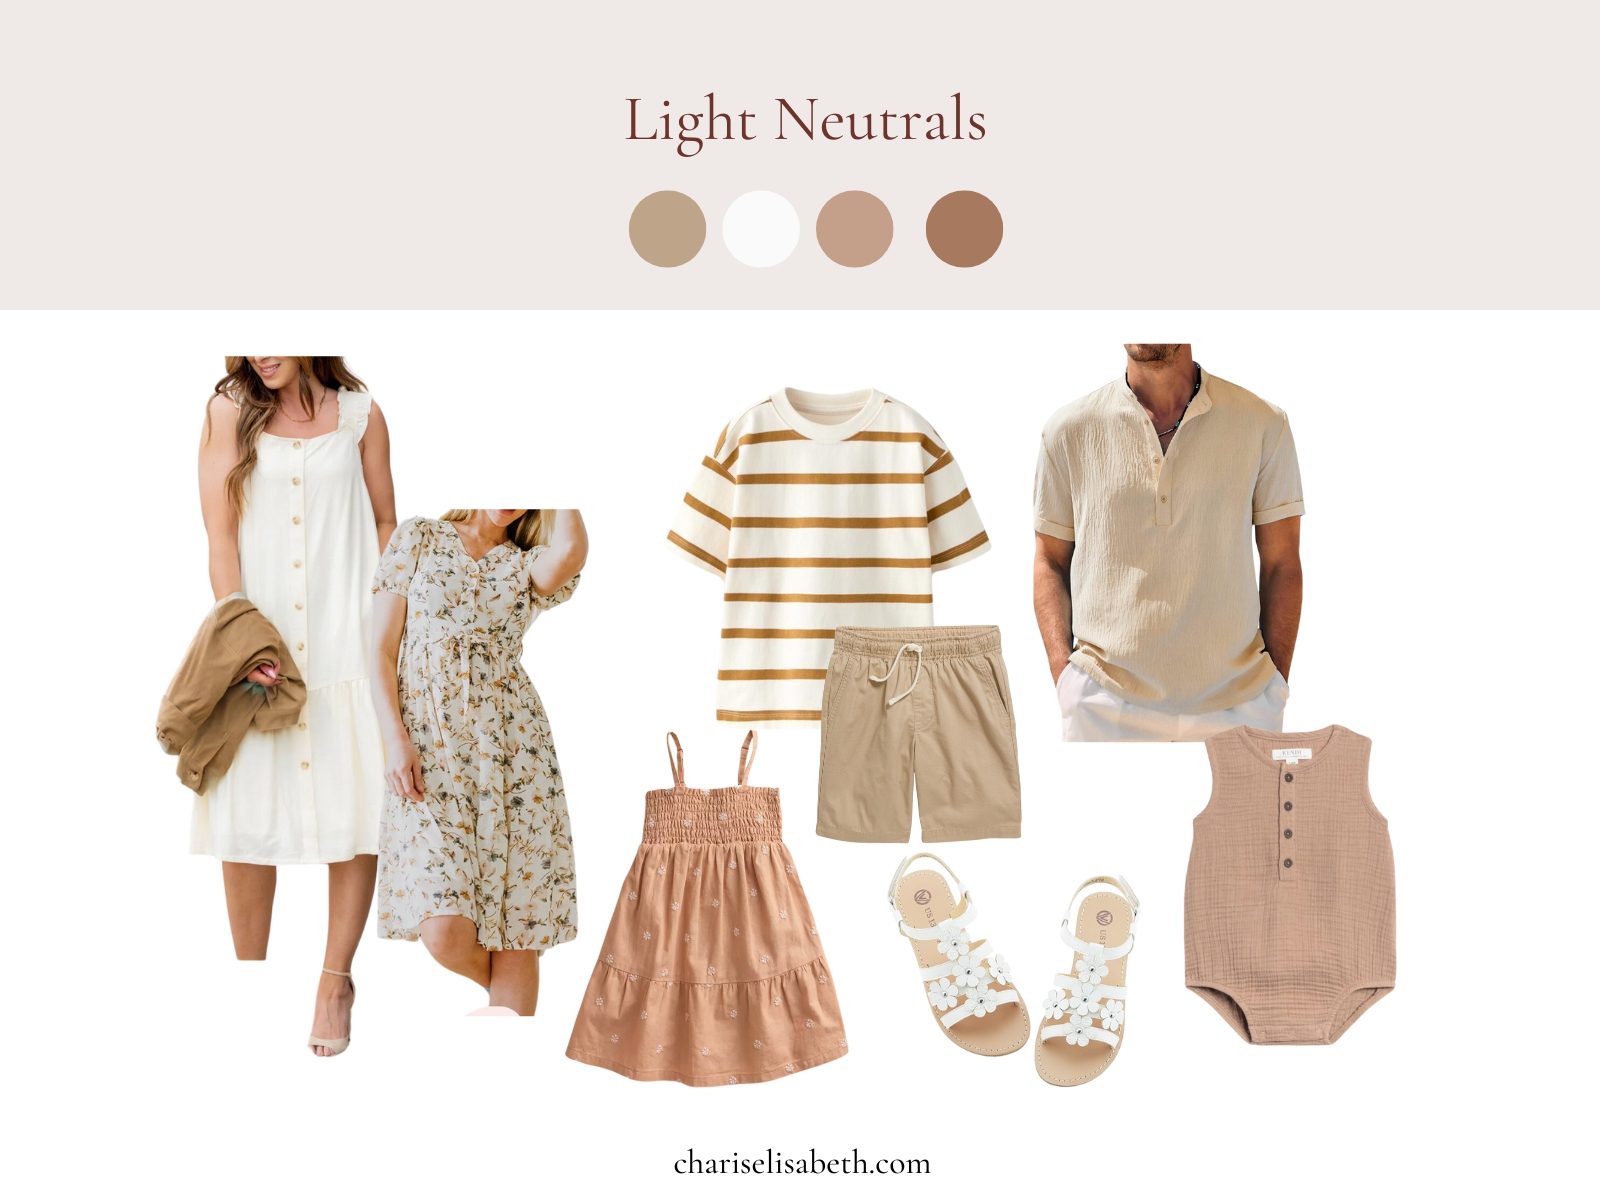 ideas for neutral clothing for a photo session.